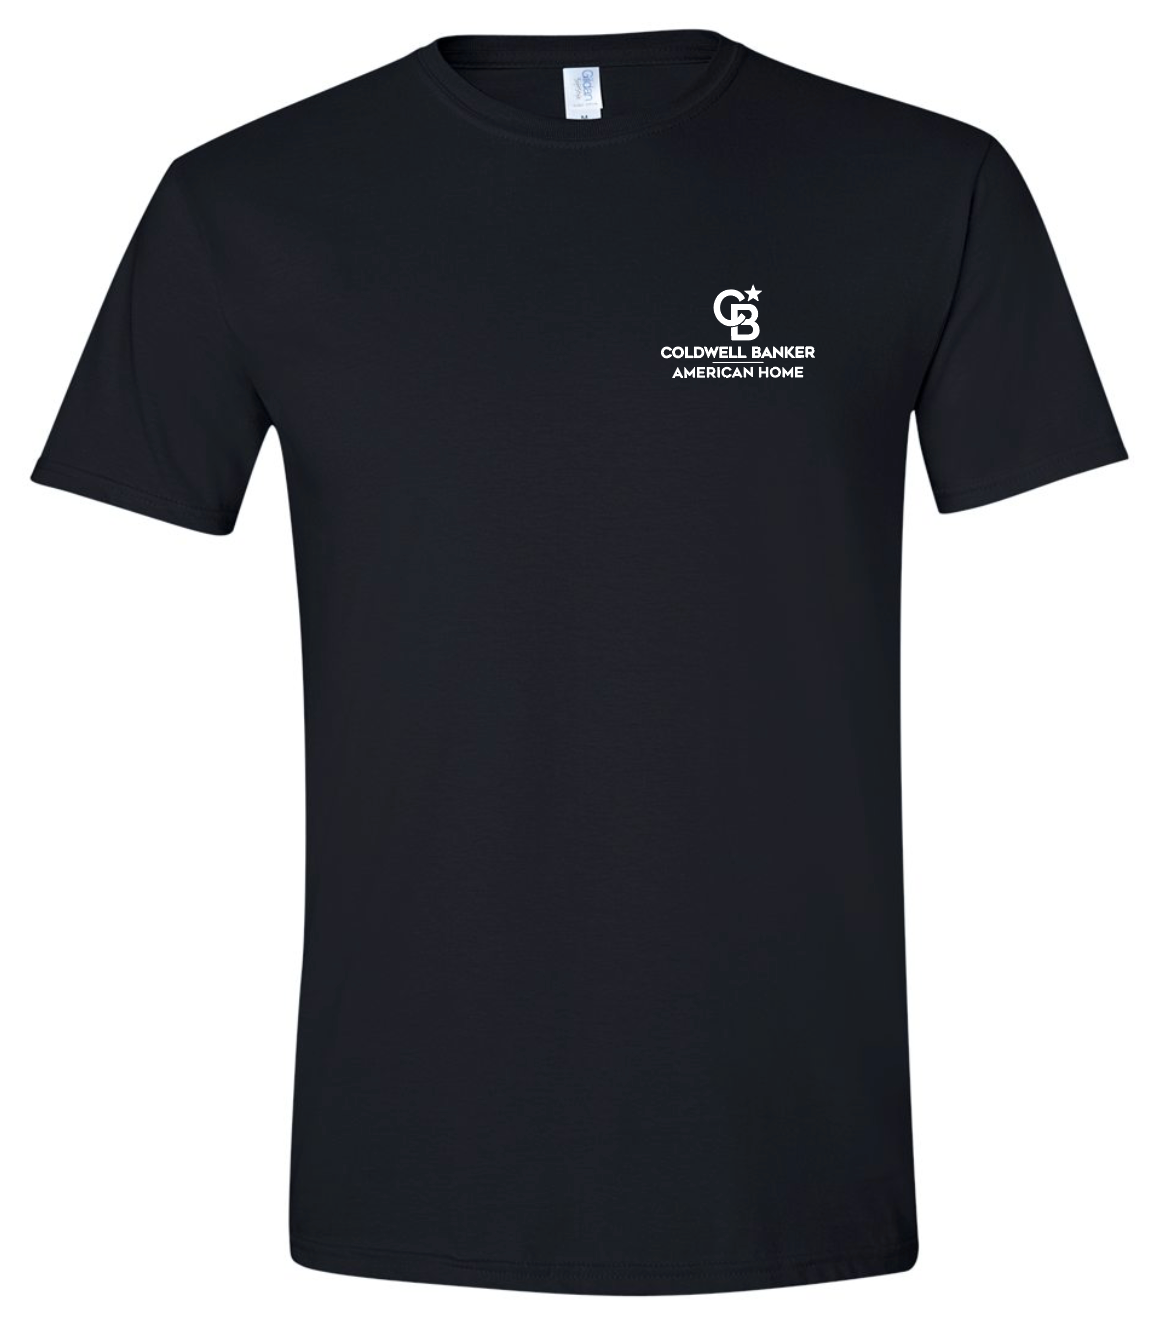 Coldwell Banker Gildan Softstyle T-Shirt - Left Chest